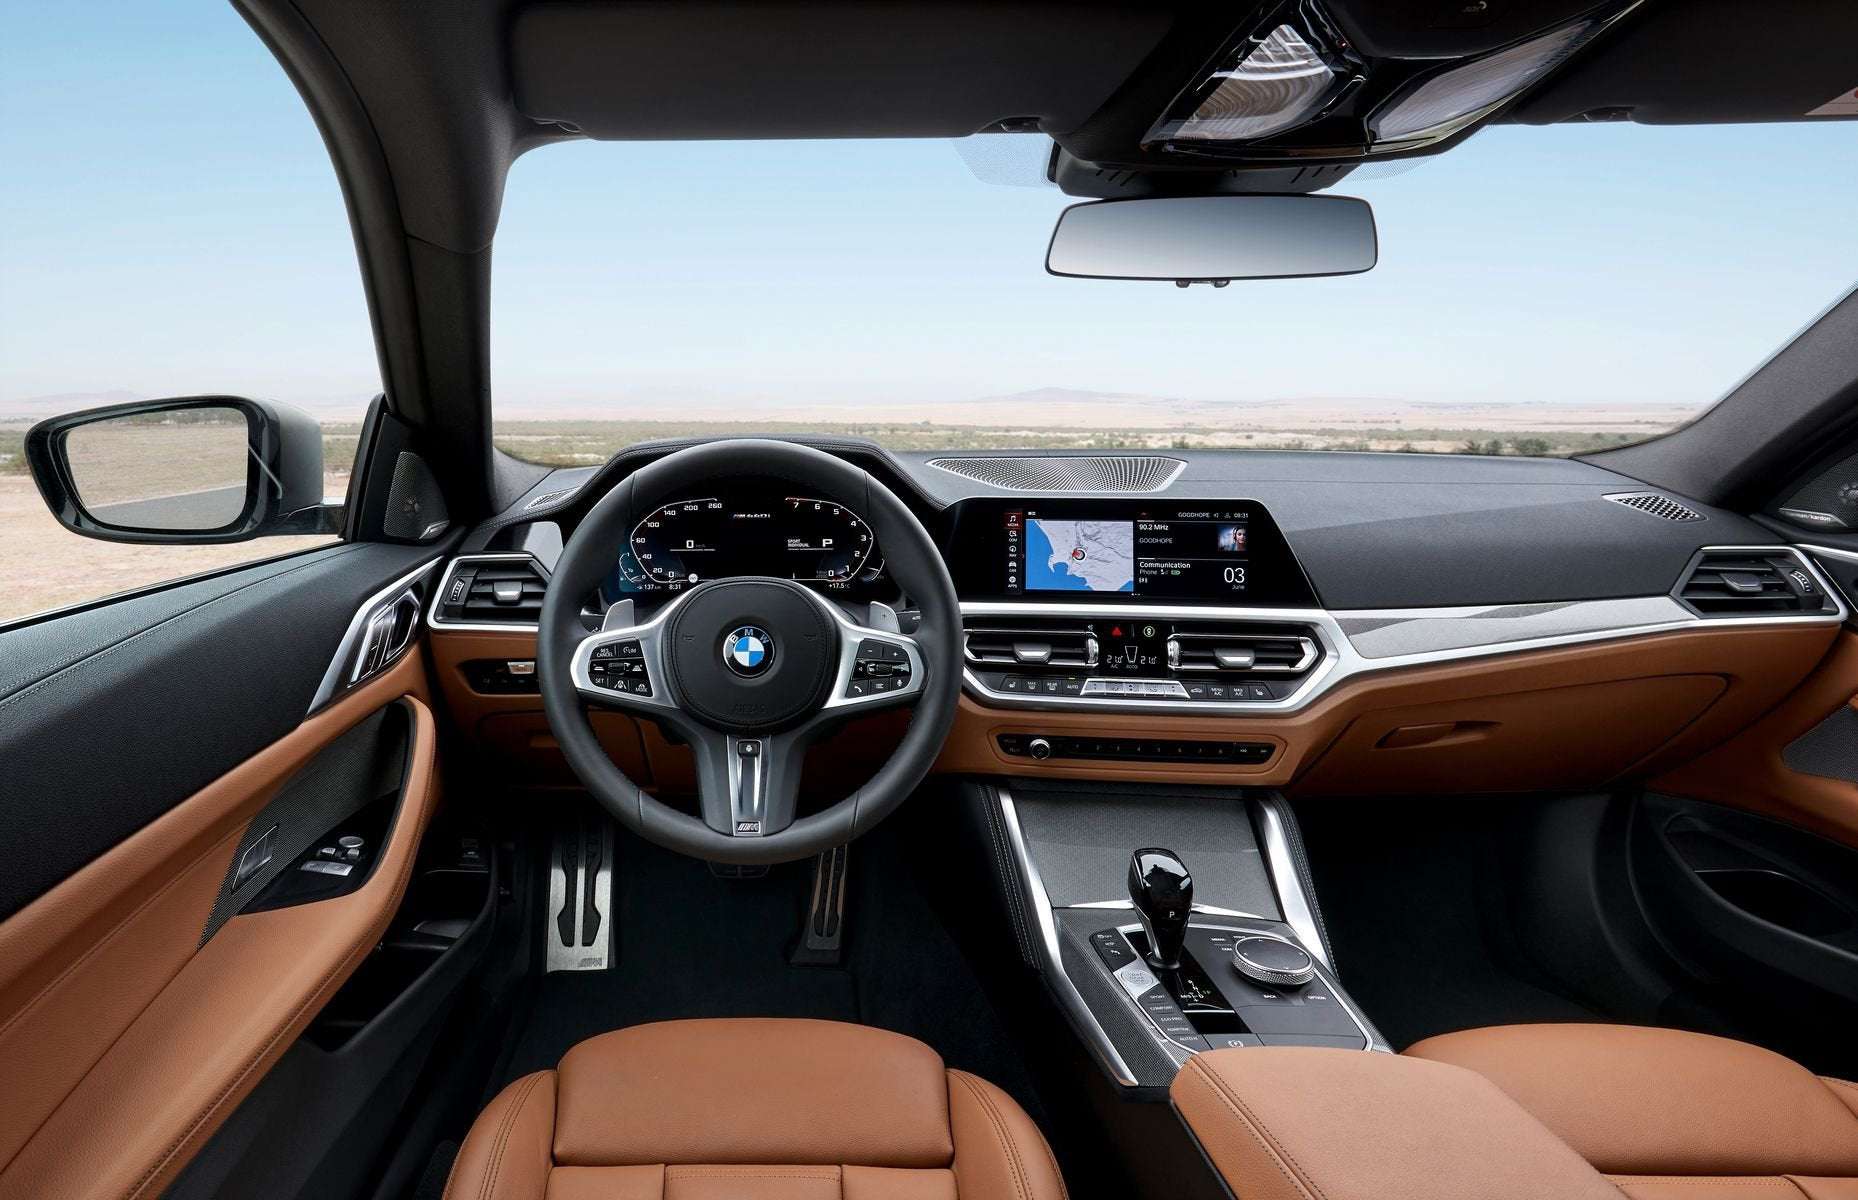 image for BMW to make owners pay for features like heated seats via subscription